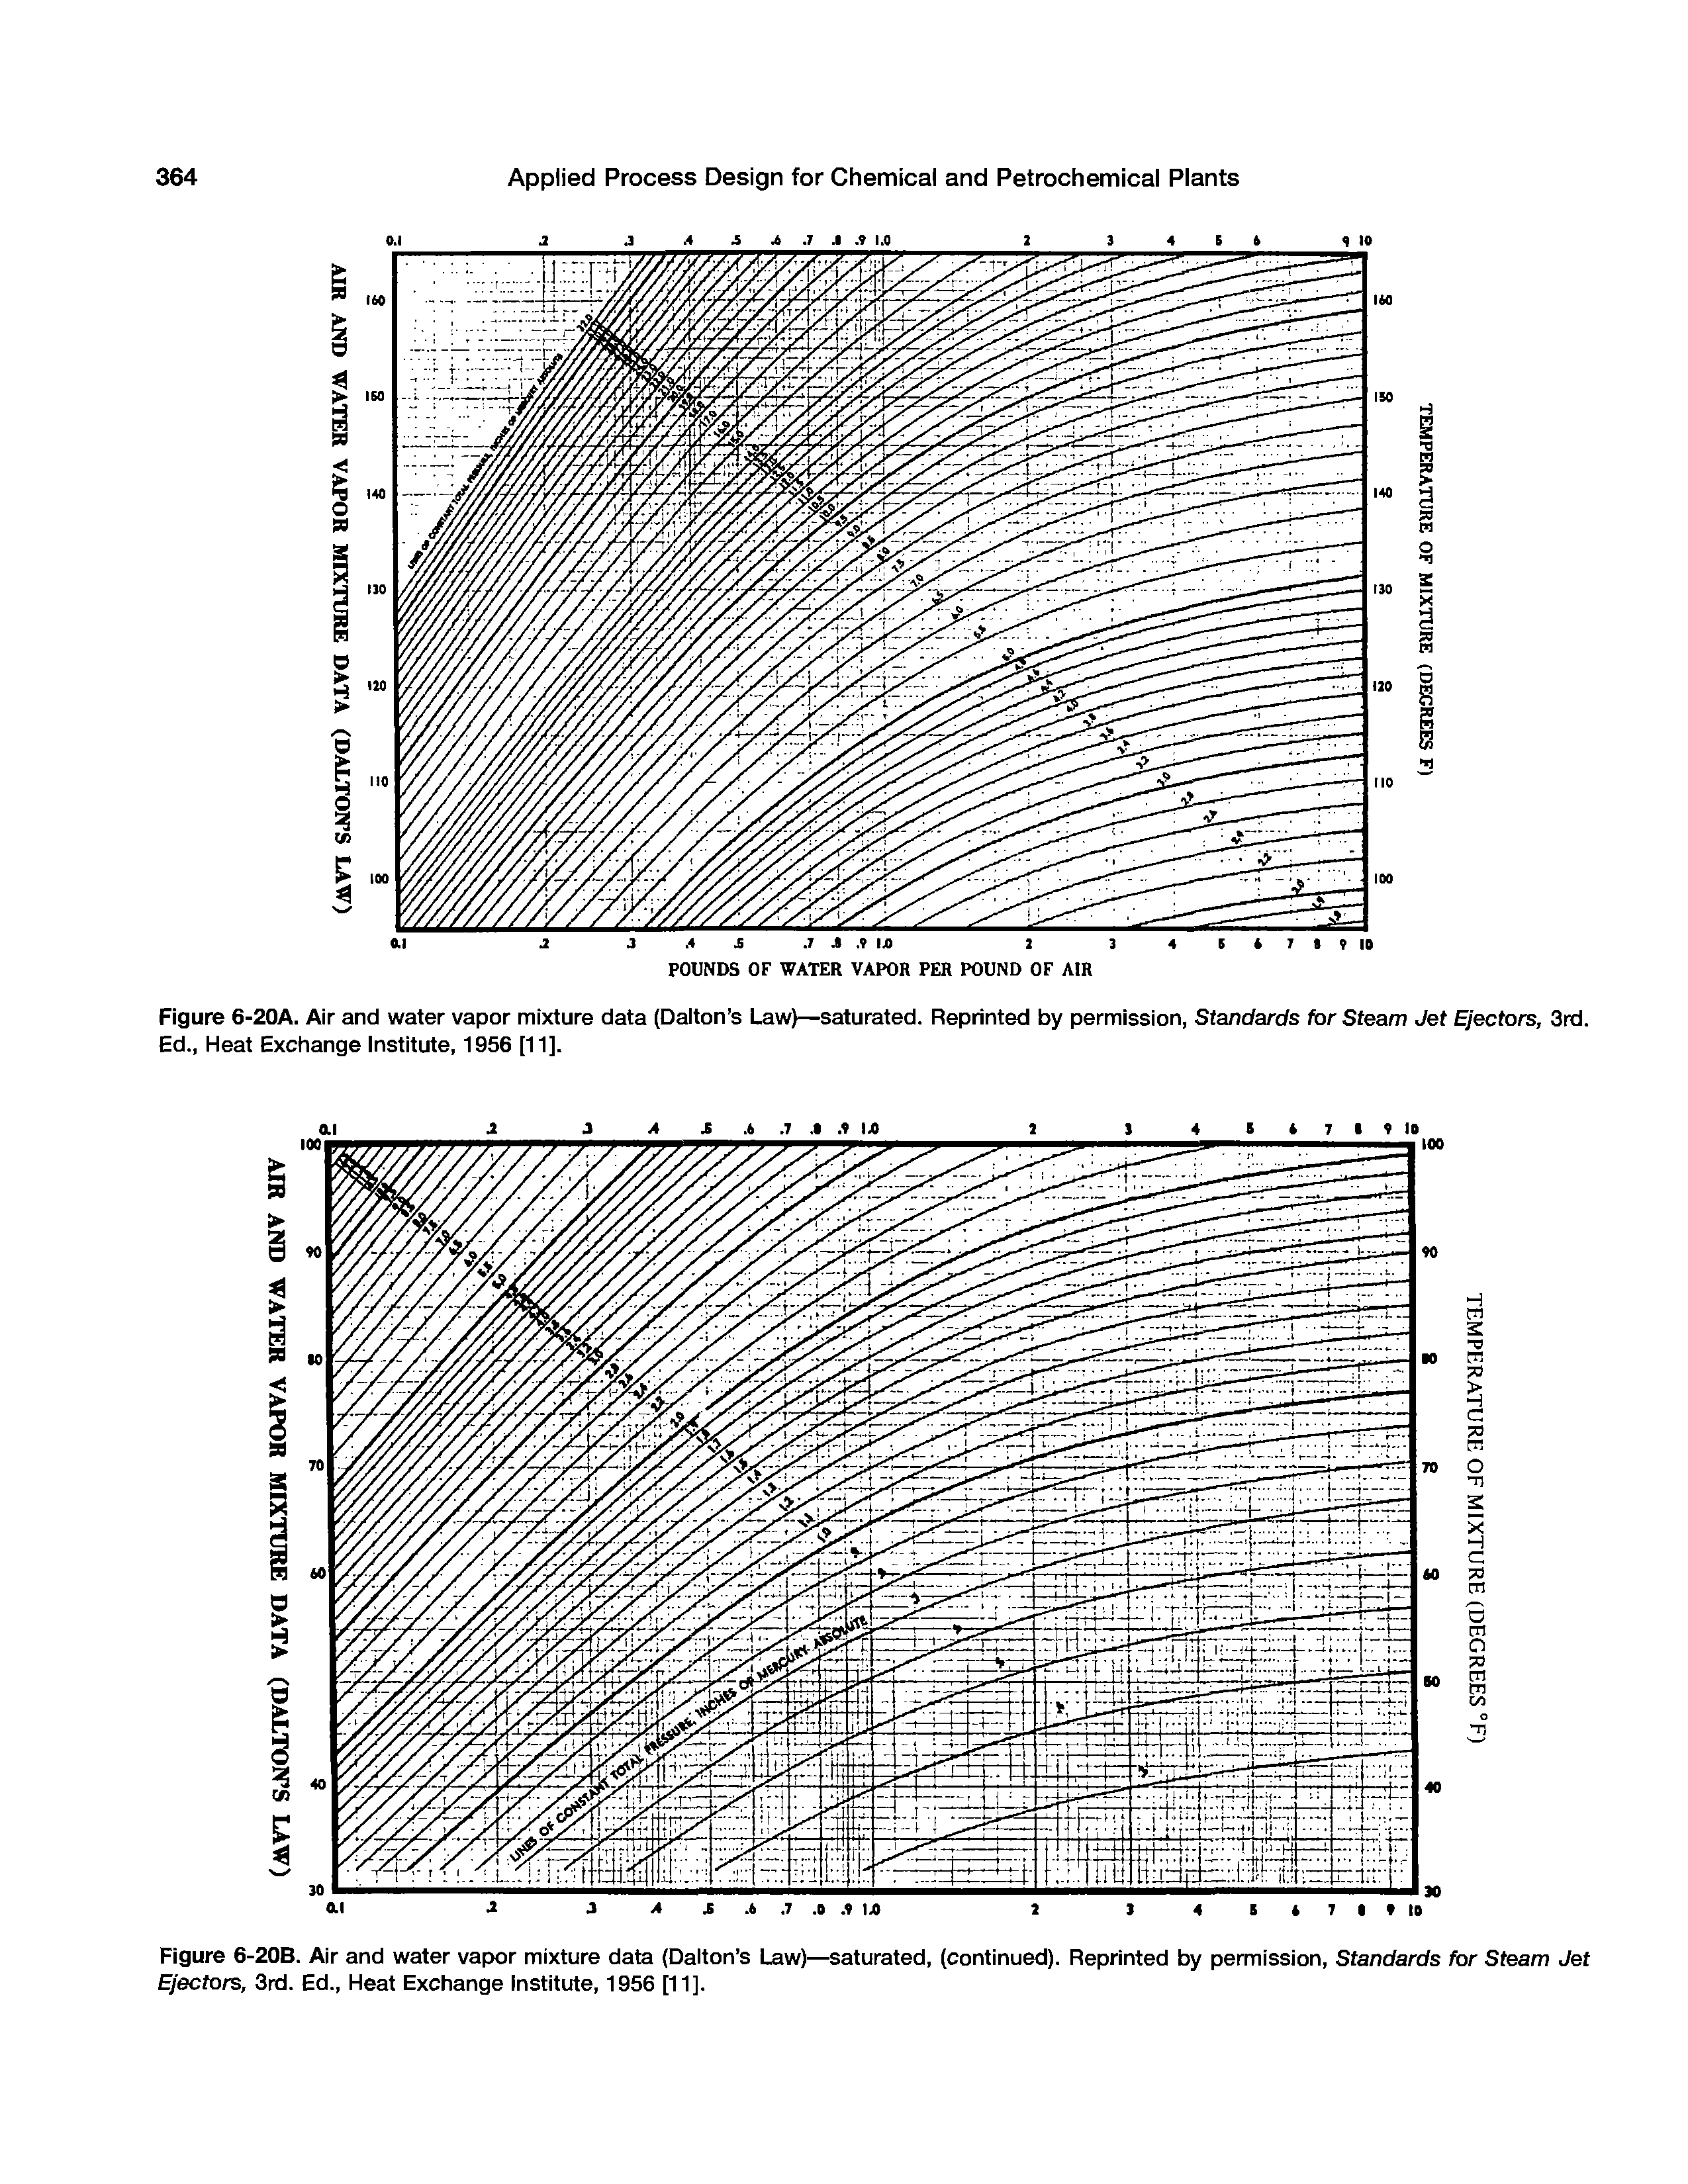 Figure 6-20B. Air and water vapor mixture data (Dalton s Law)—saturated, (continued). Reprinted by permission. Standards for Sfeam Jet Ejectors, 3rd. Ed., Heat Exchange Institute, 1956 [11].